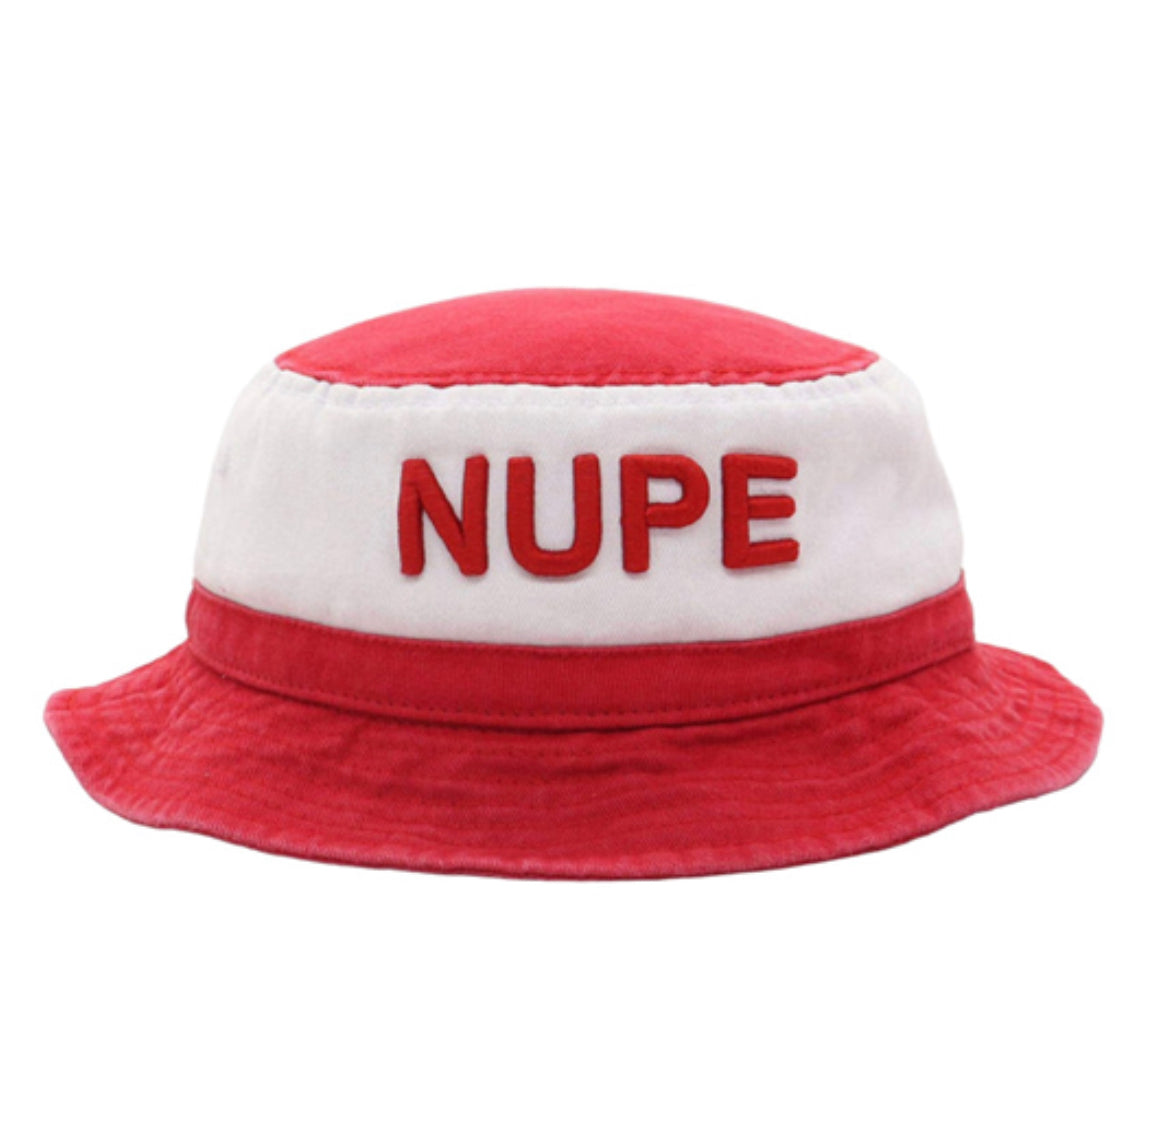 Represent your greatest fraternity in style with this Kappa Alpha Psi "NUPE" bucket hat. Perfect for any event, this hat will keep you looking cool while showing your affiliation. Made with high-quality materials, it is durable and comfortable to wear.